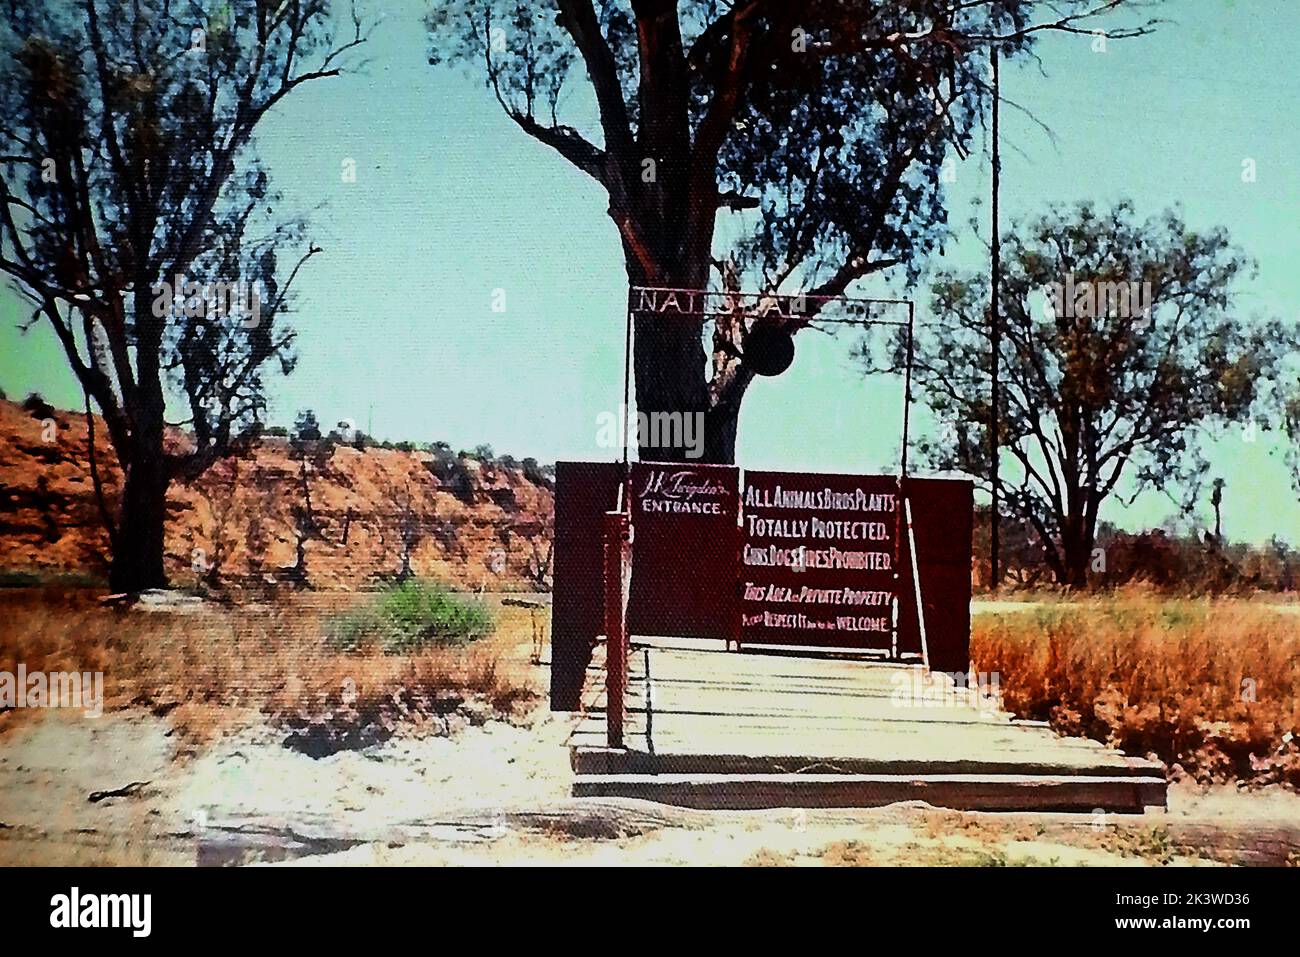 A 1971 photograph taken in Waikerie Australia of the entrance to the privately owned natural koala and wildlife park on the property of   J.K (Kevin) Twigden, a local apricot farmer. The wildlife park was located on the banks of the Murray river (behind the entrance, Stock Photo